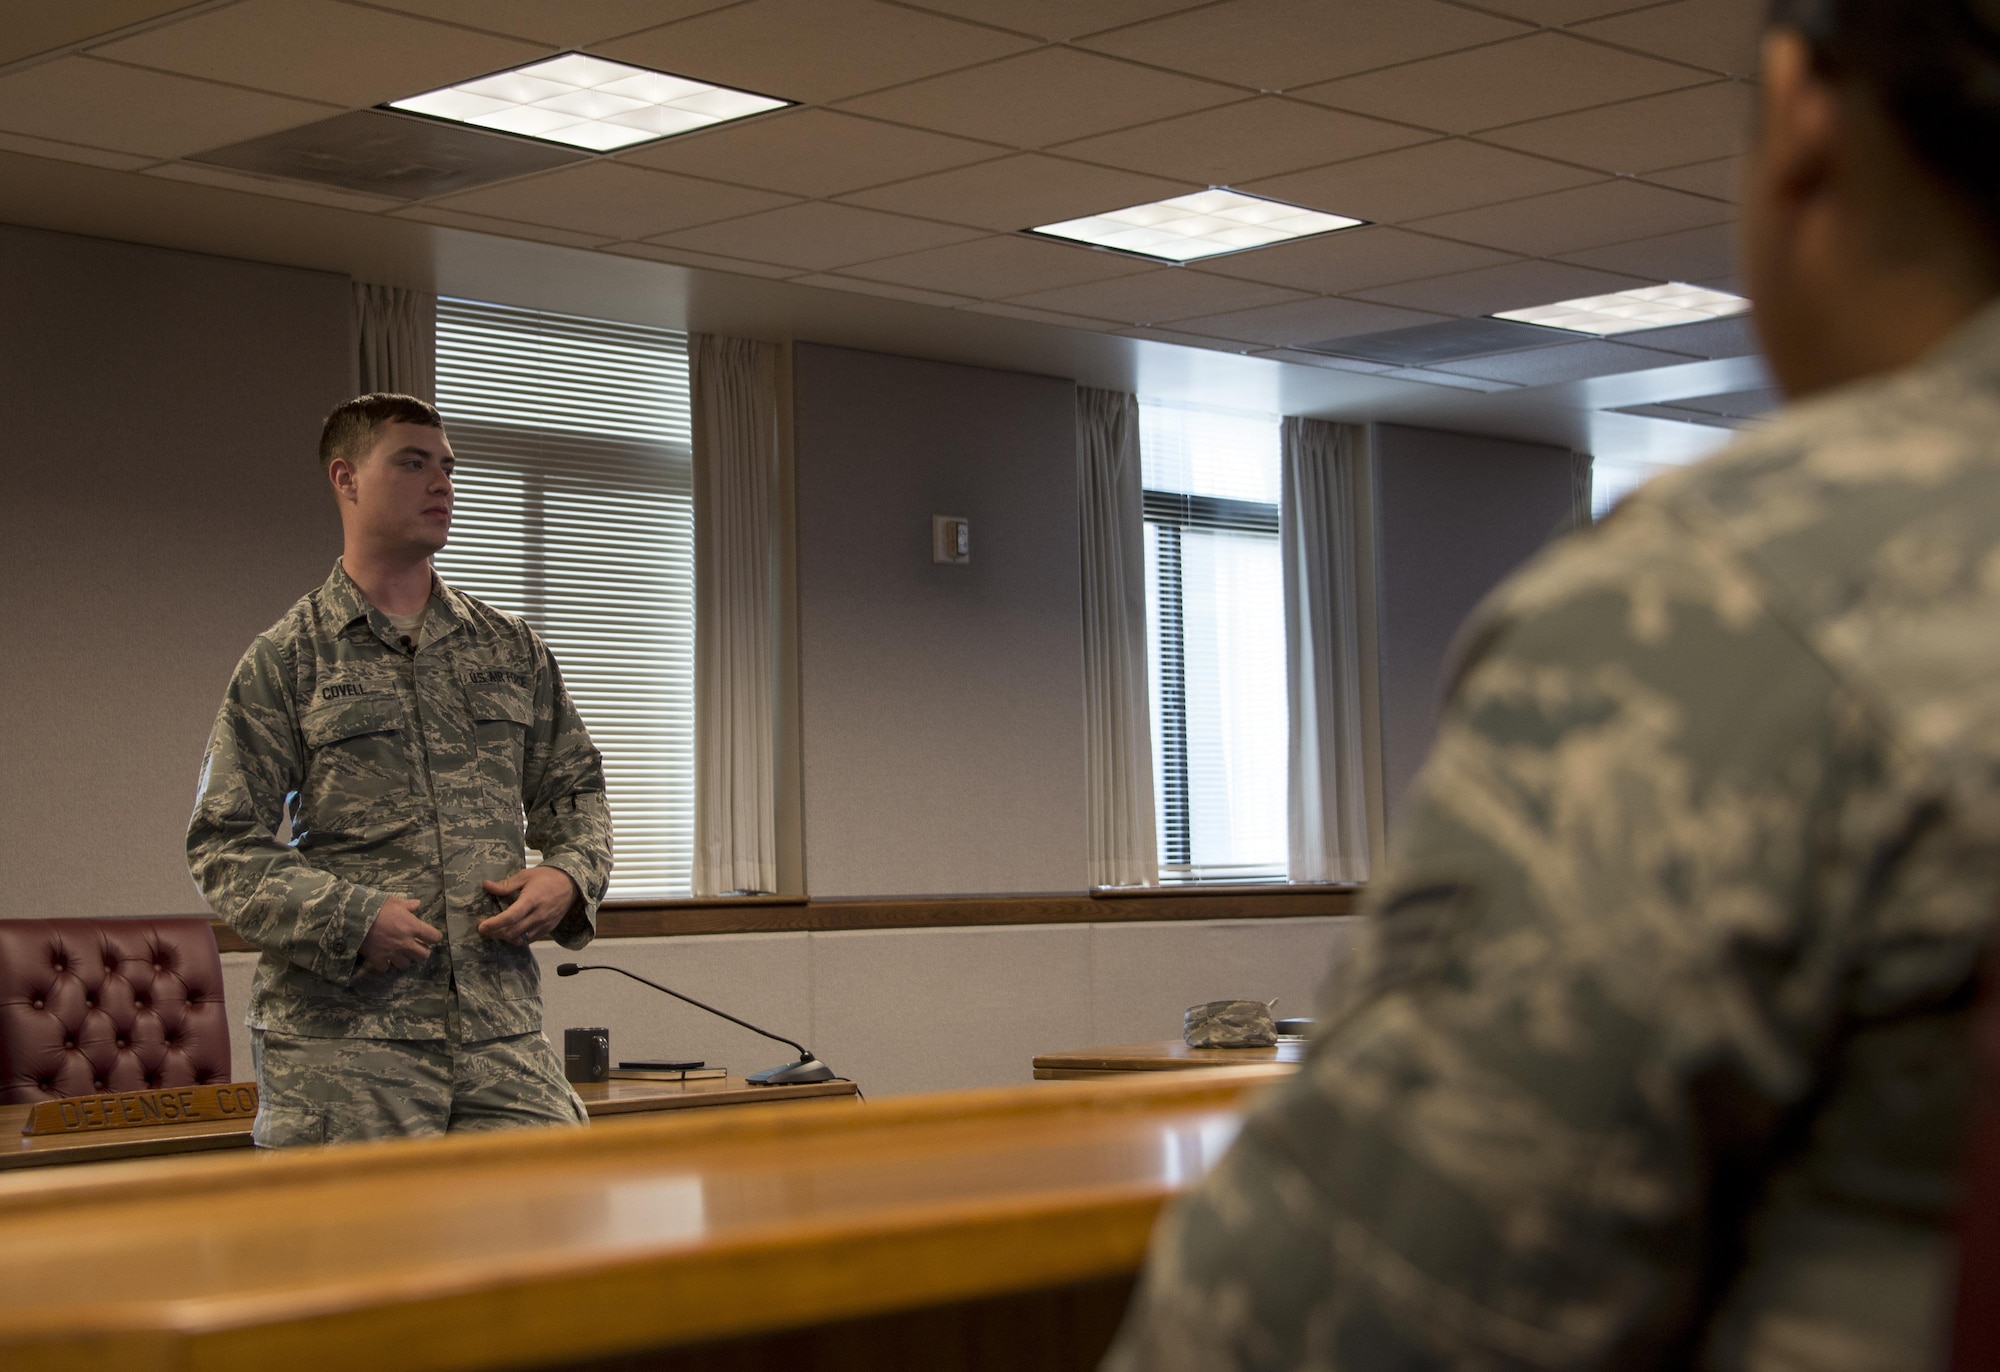 Airman basic Kendall Covell, 60th Communications Squadron, left, shares his personal story of being recently court-martialed to Airmen participating in the True North program at Travis Air Force Base, Calif., Sept. 15, 2016. The True North program showcases the full spectrum of the military judicial process including incarceration. (U.S. Air Force photo by Staff Sgt. Charles Rivezzo) 